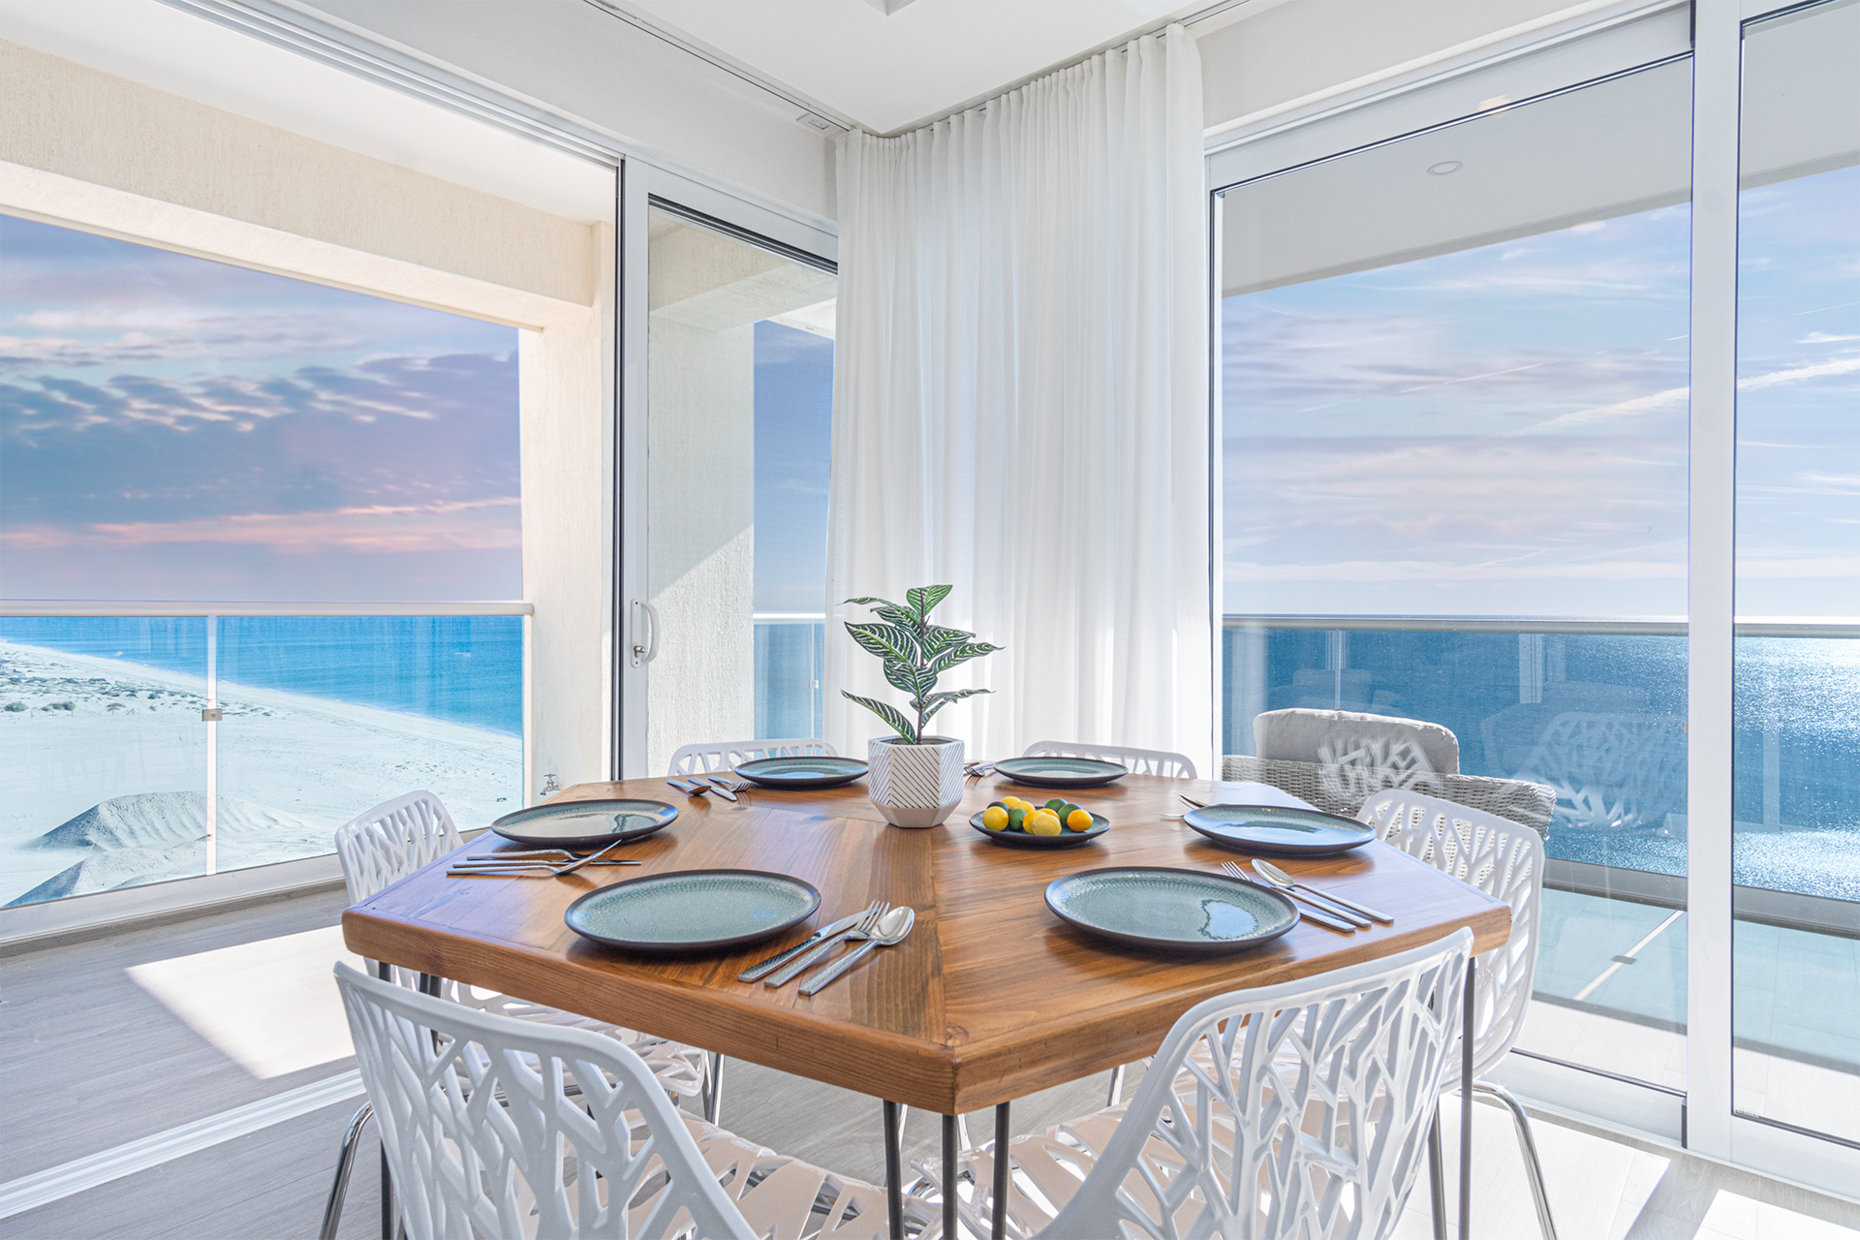 The dining table lets six of you enjoy expansive ocean front views while dining.